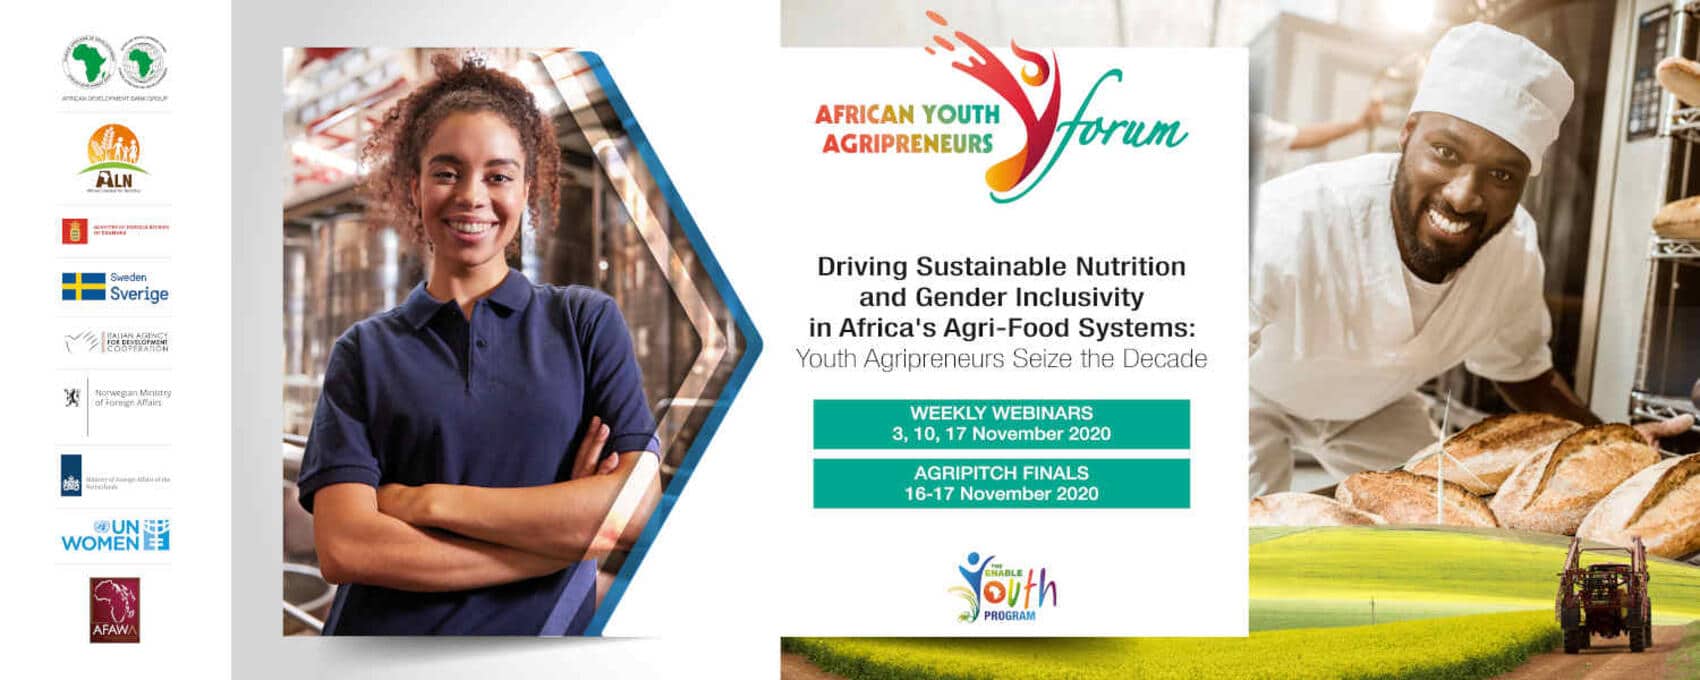 AfDB African Youth Agripreneur Forum (AYAF) and AgriPitch Competition 2022 for African Entrepreneurs